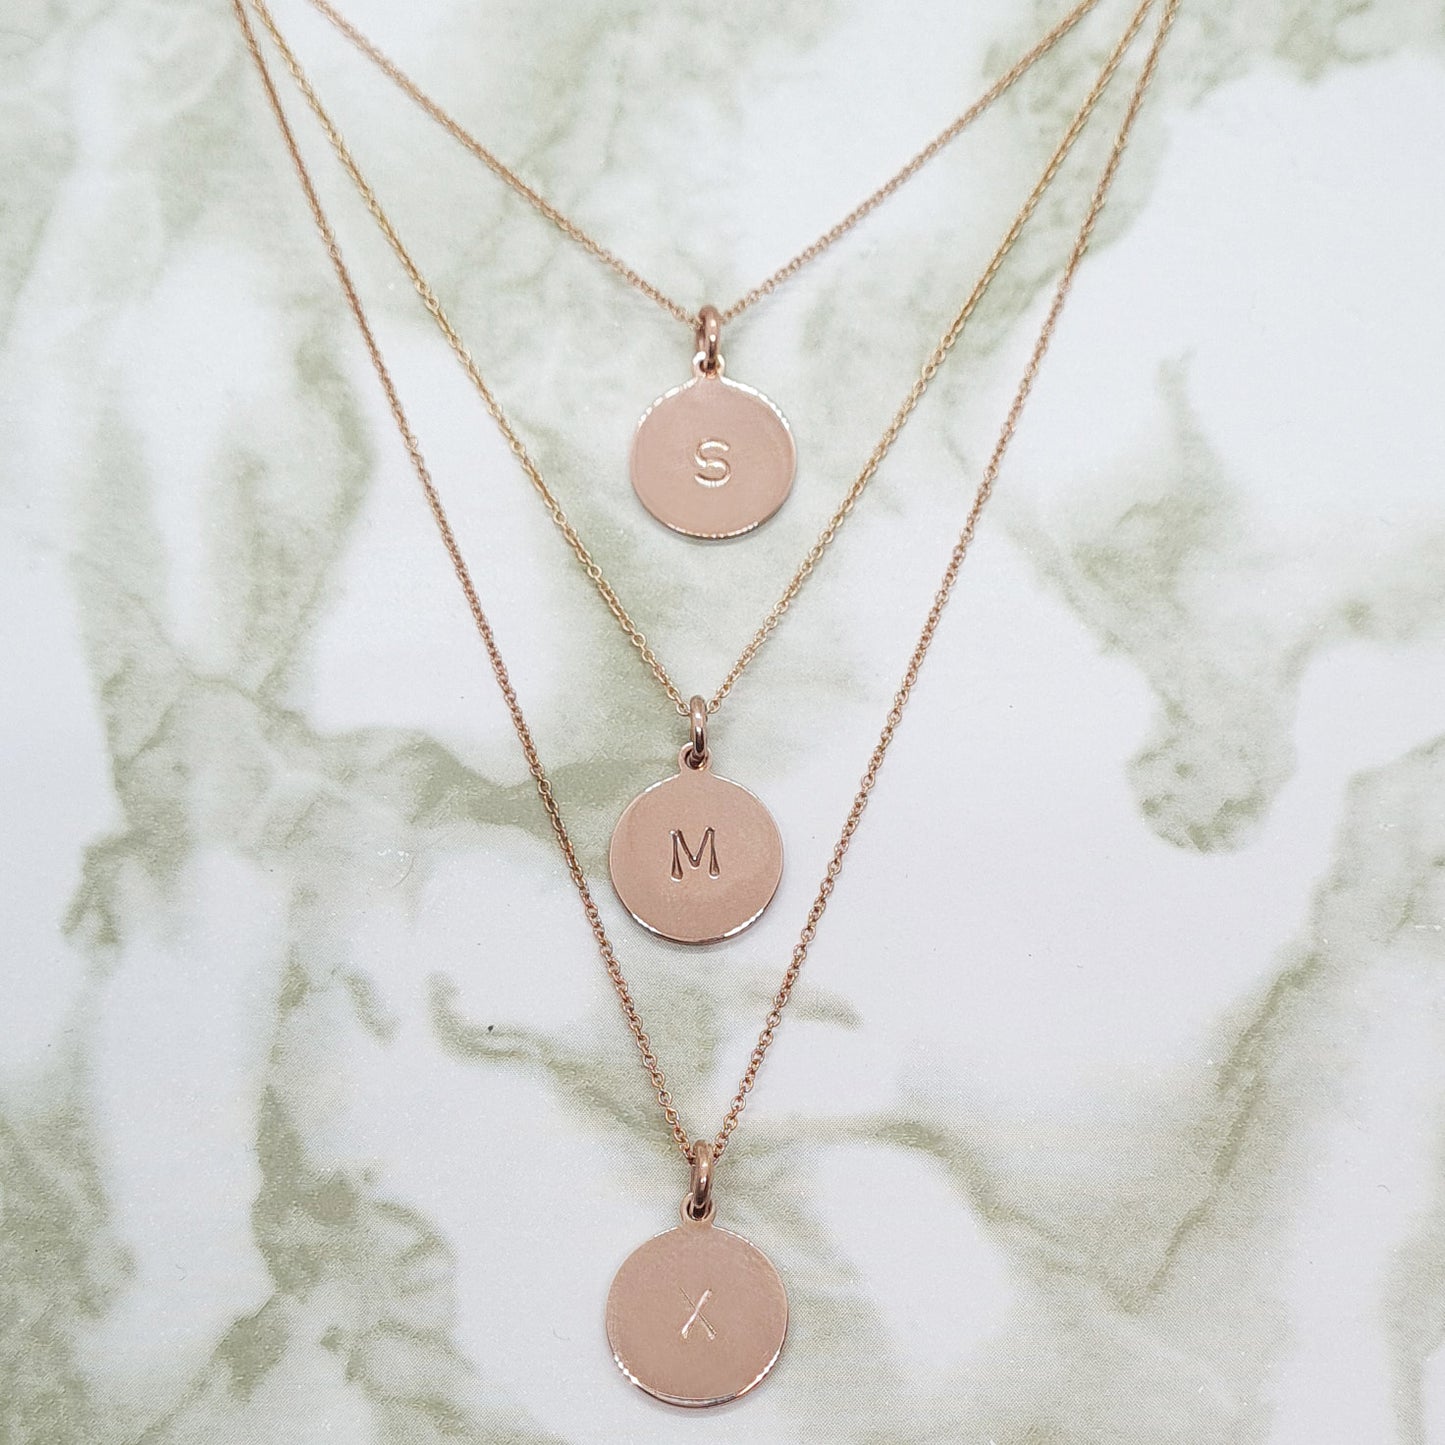 Handcrafted 3 x 12mm Signet Discs Layered Necklace Rose Gold plated copper medallion